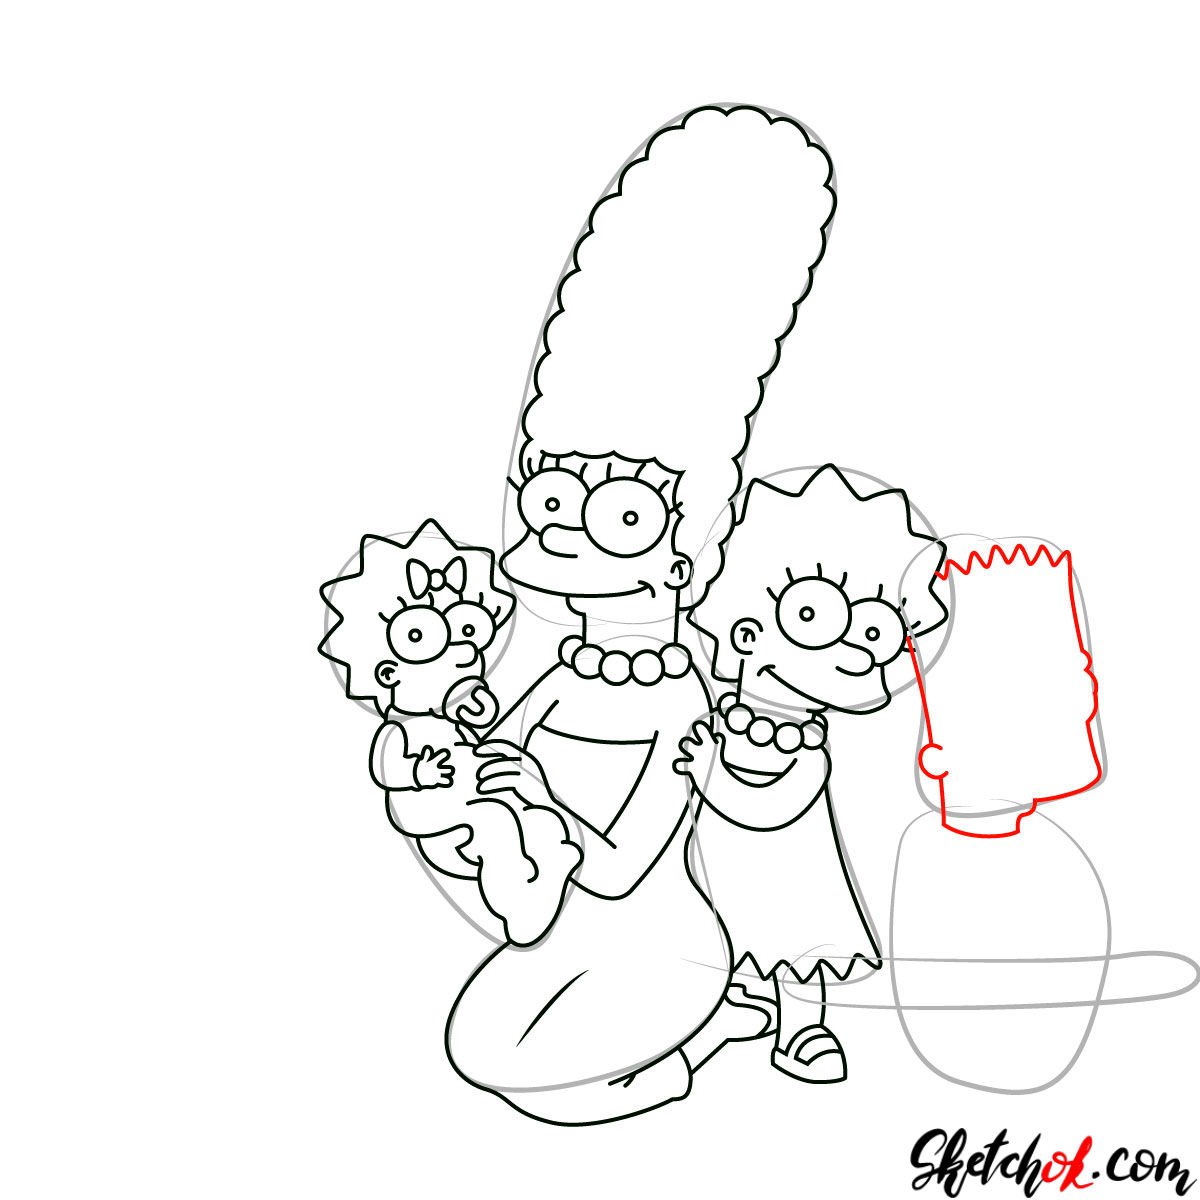 How to draw the Simpsons Family - step 16